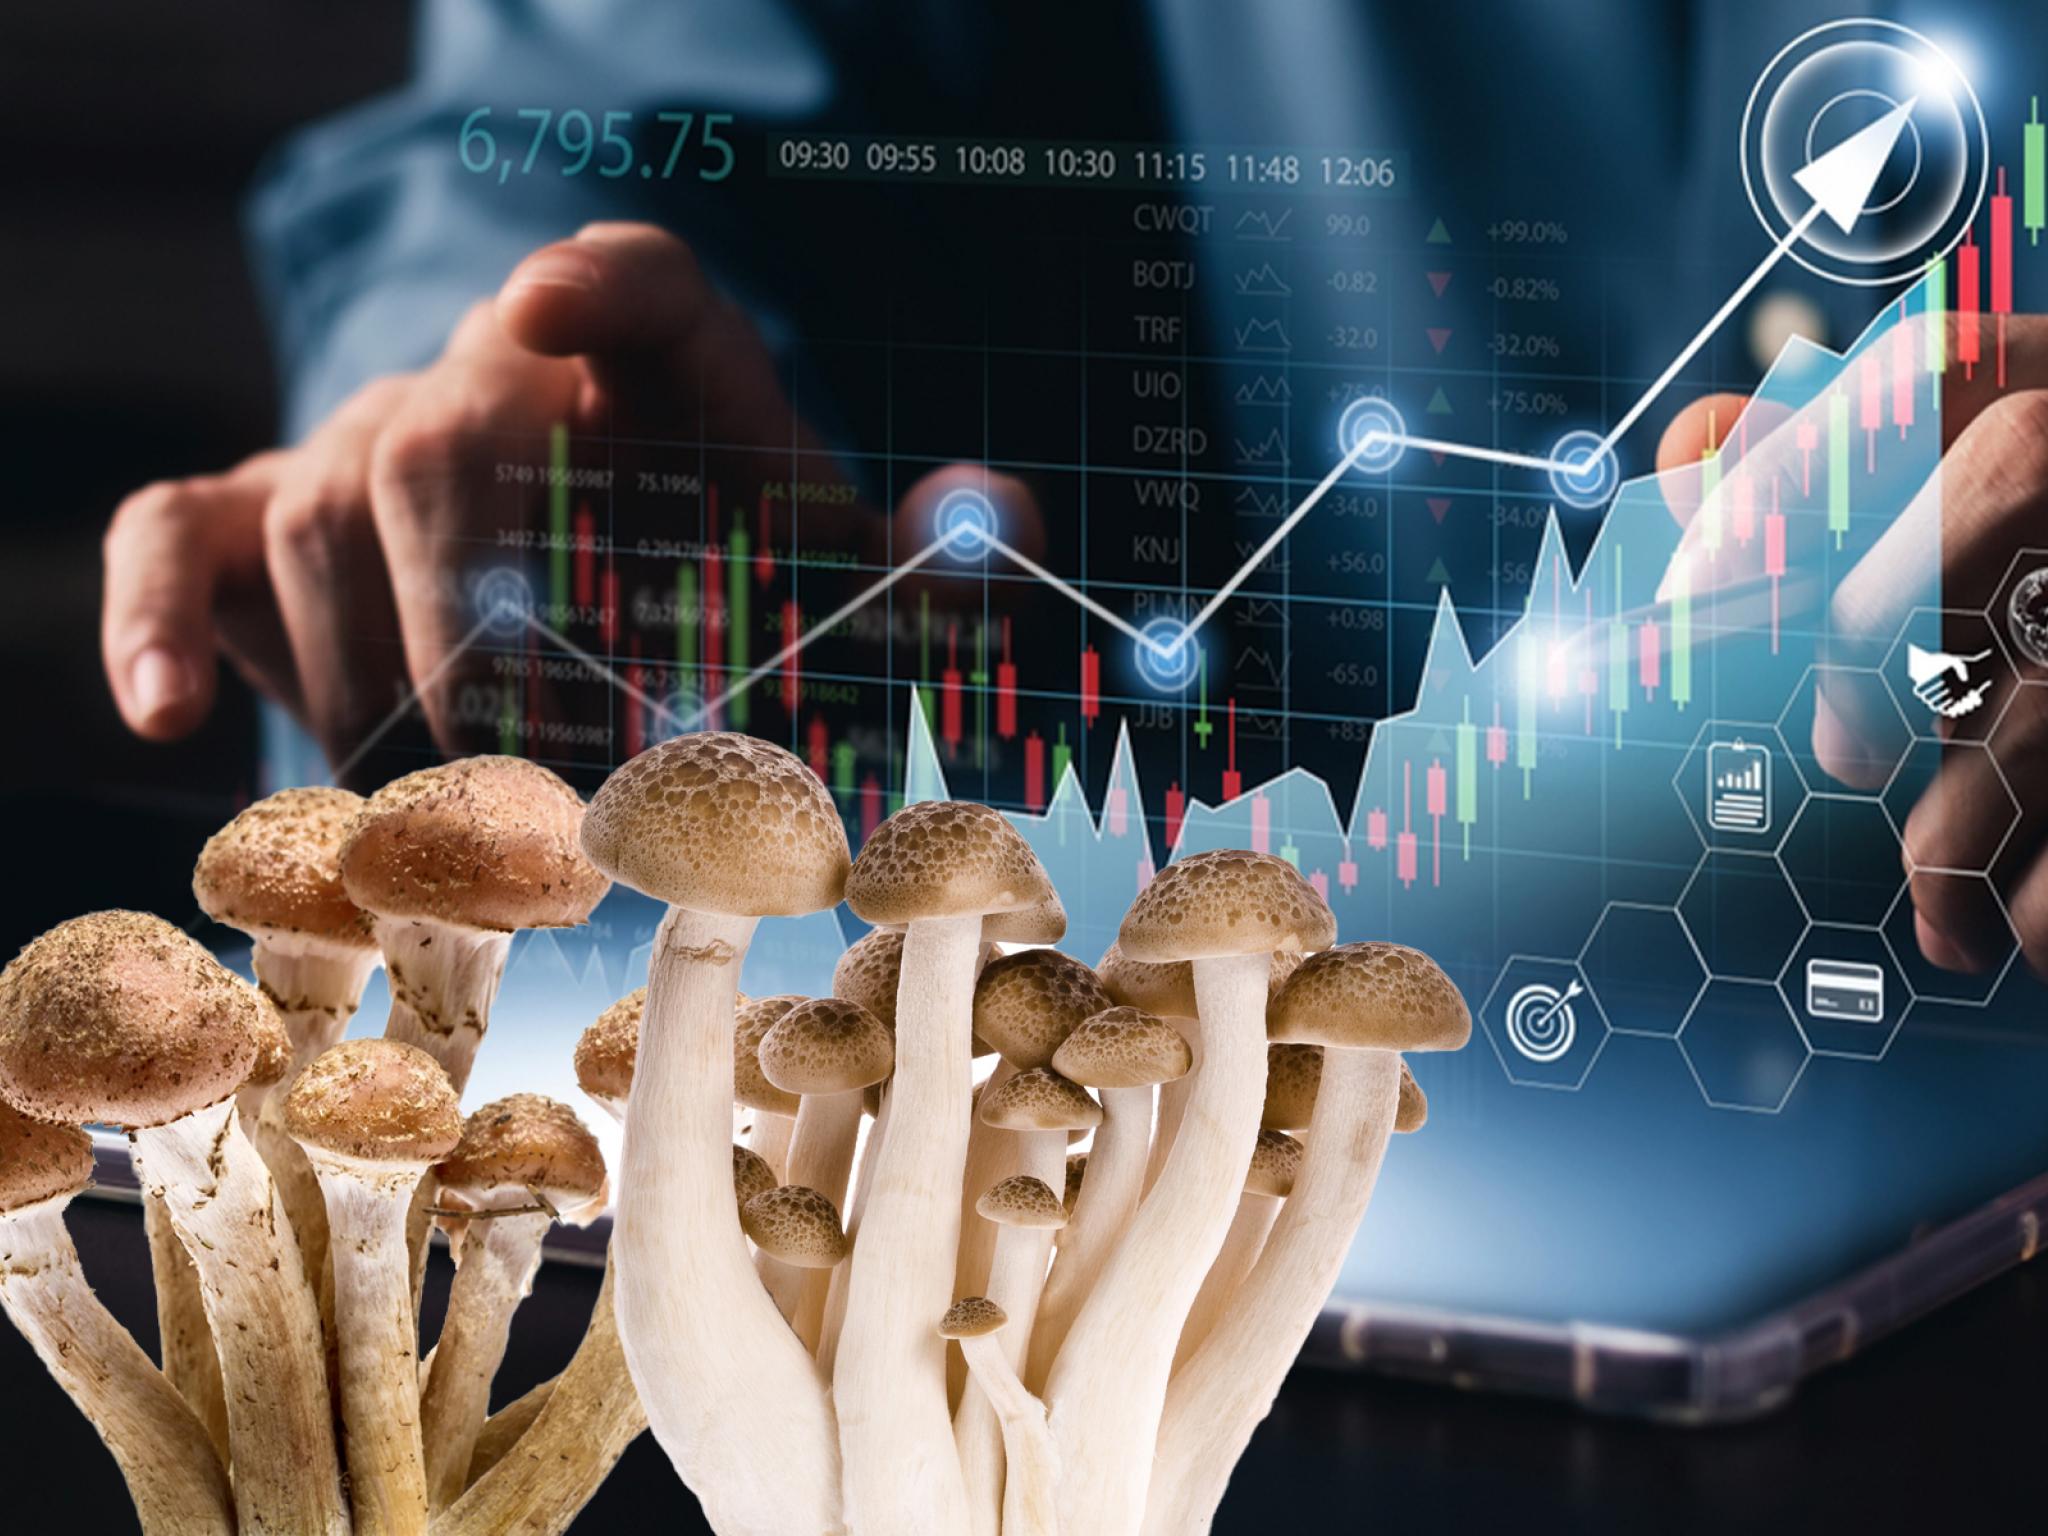  the-psychedelic-mushrooms-market-between-legitimate-harvesting-and-illegal-retail-sales 